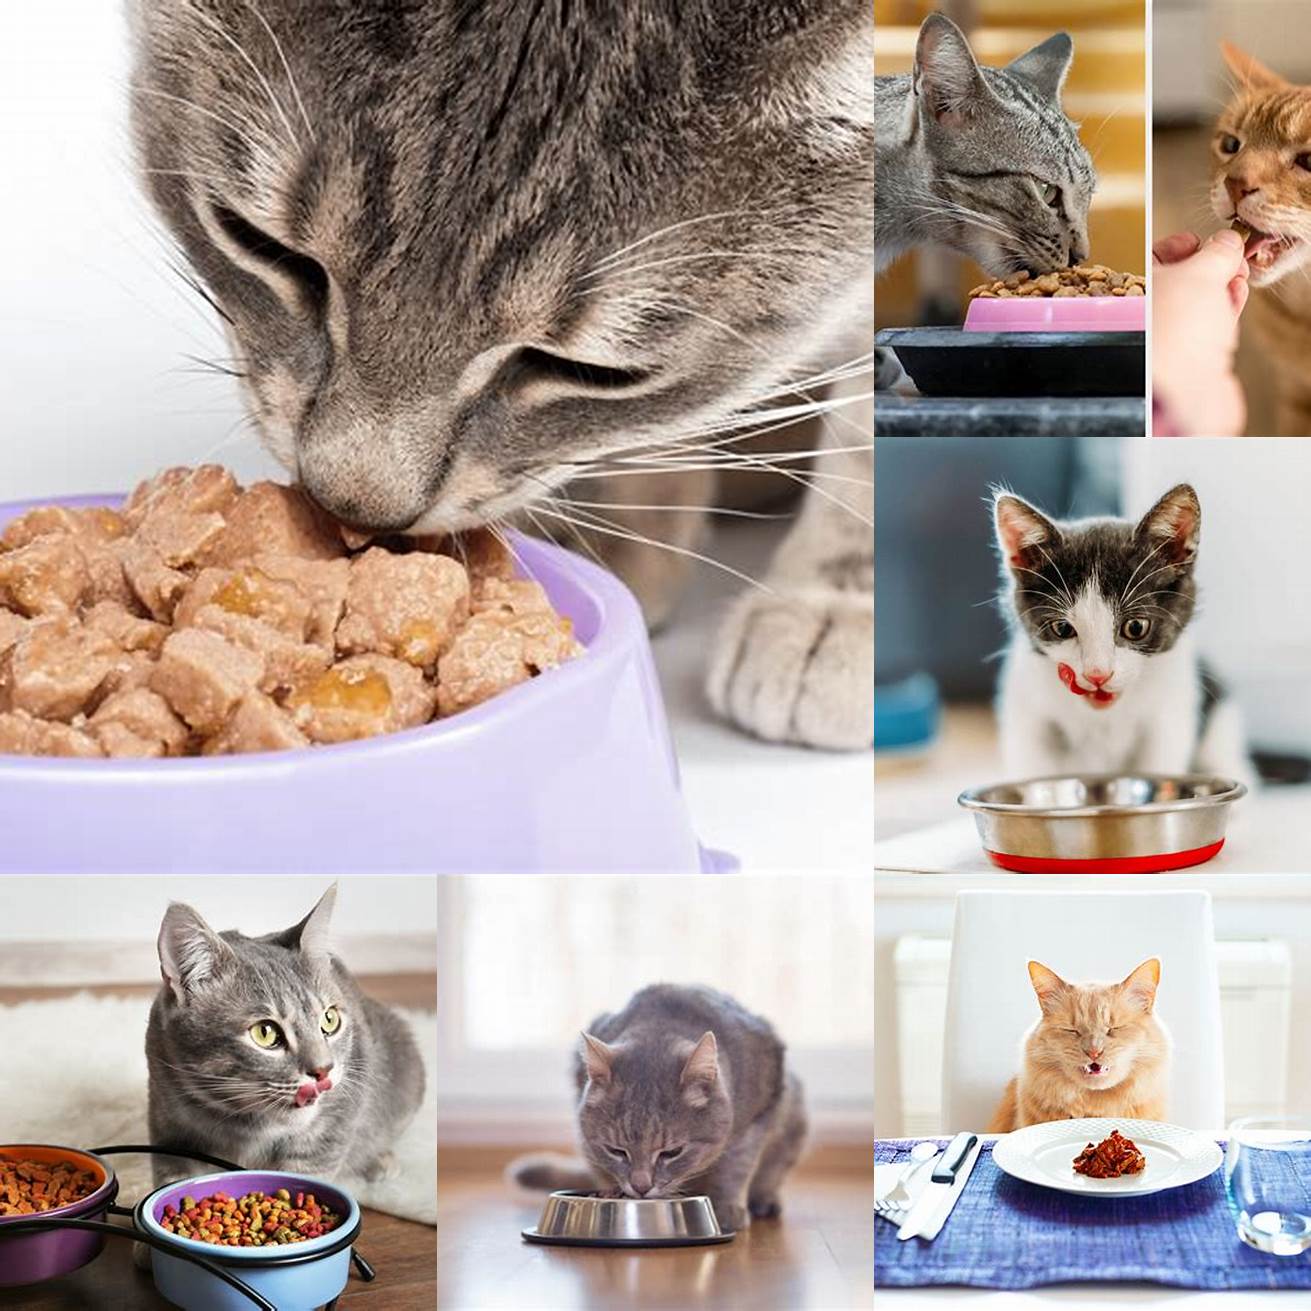 Design Choose a design that suits your cats eating habits